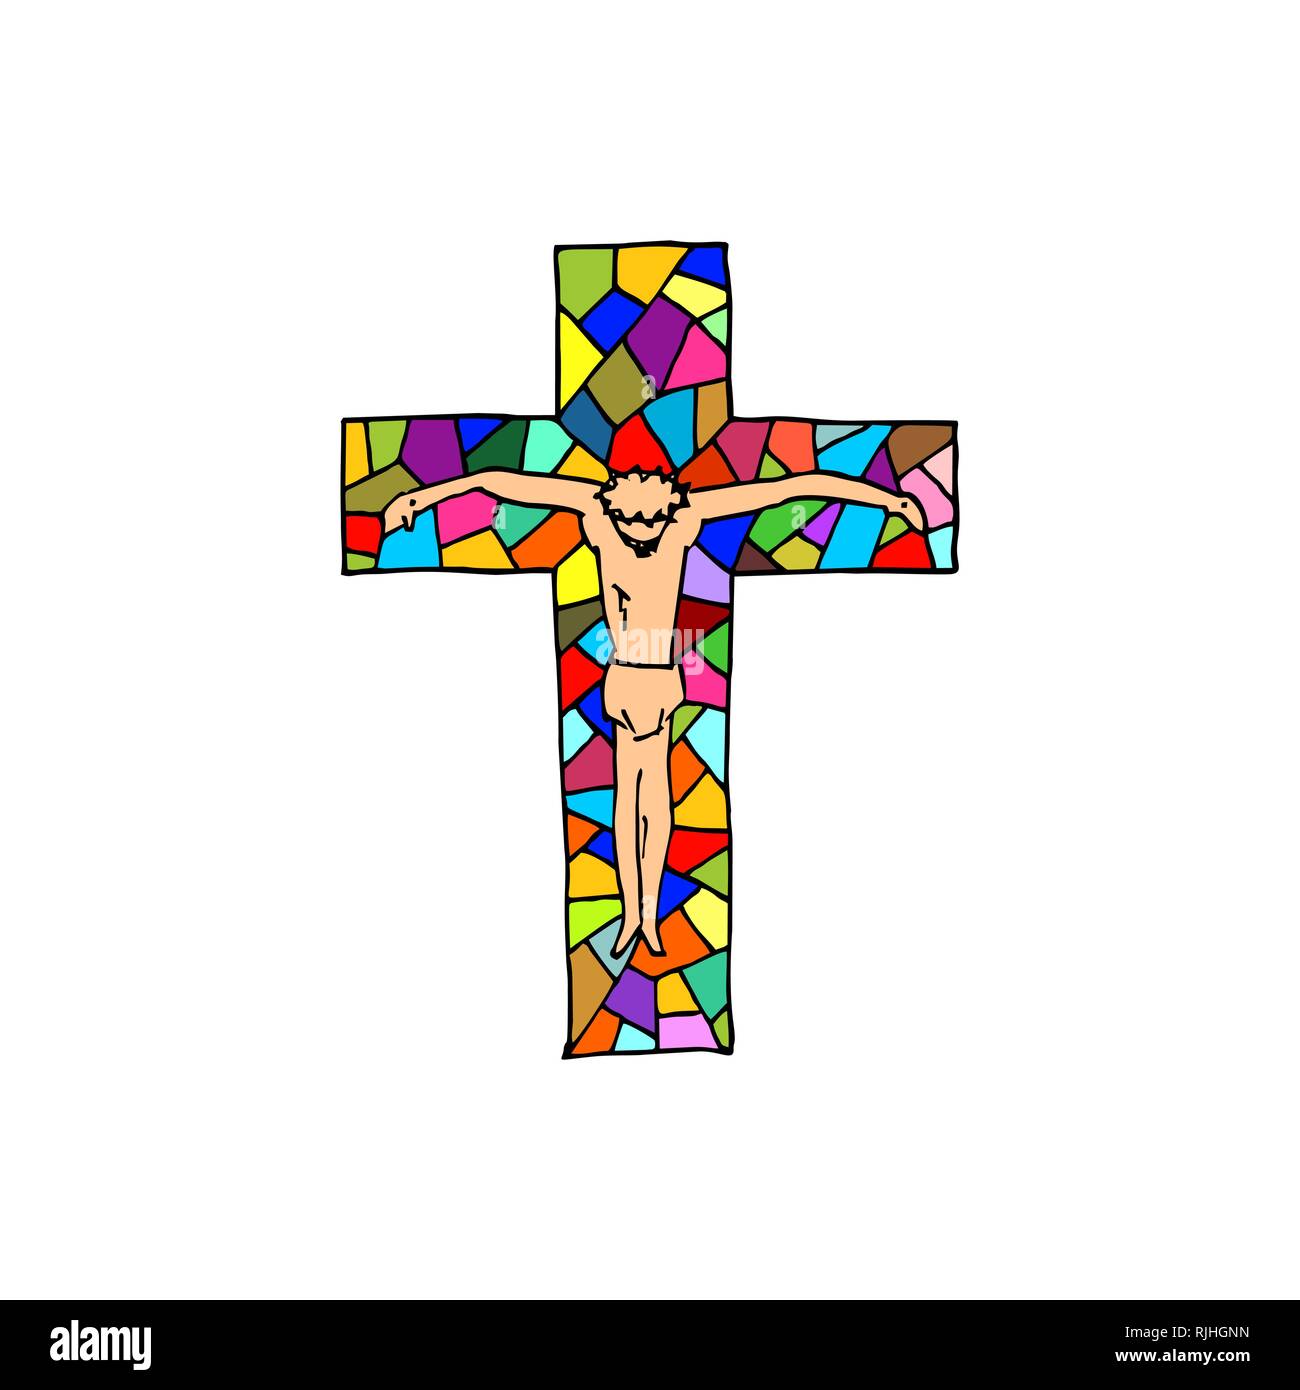 Lord Jesus on the cross. Cross drawn by hand. Mosaic style. Christian and biblical symbols. Stock Vector